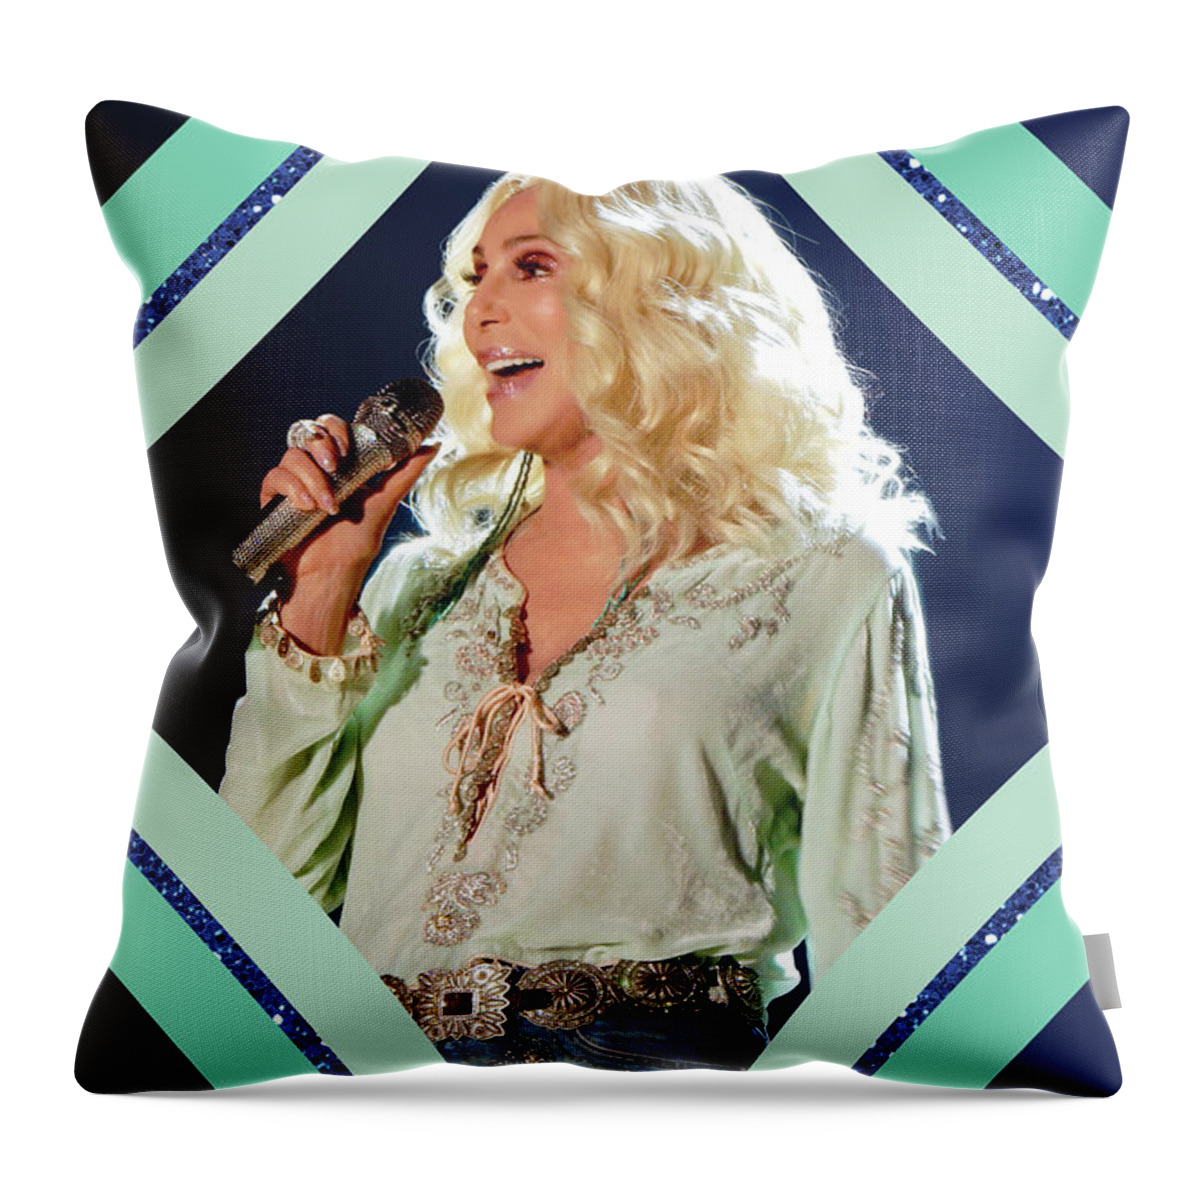 Cher Throw Pillow featuring the digital art Cher - Teal Diamond by Cher Style